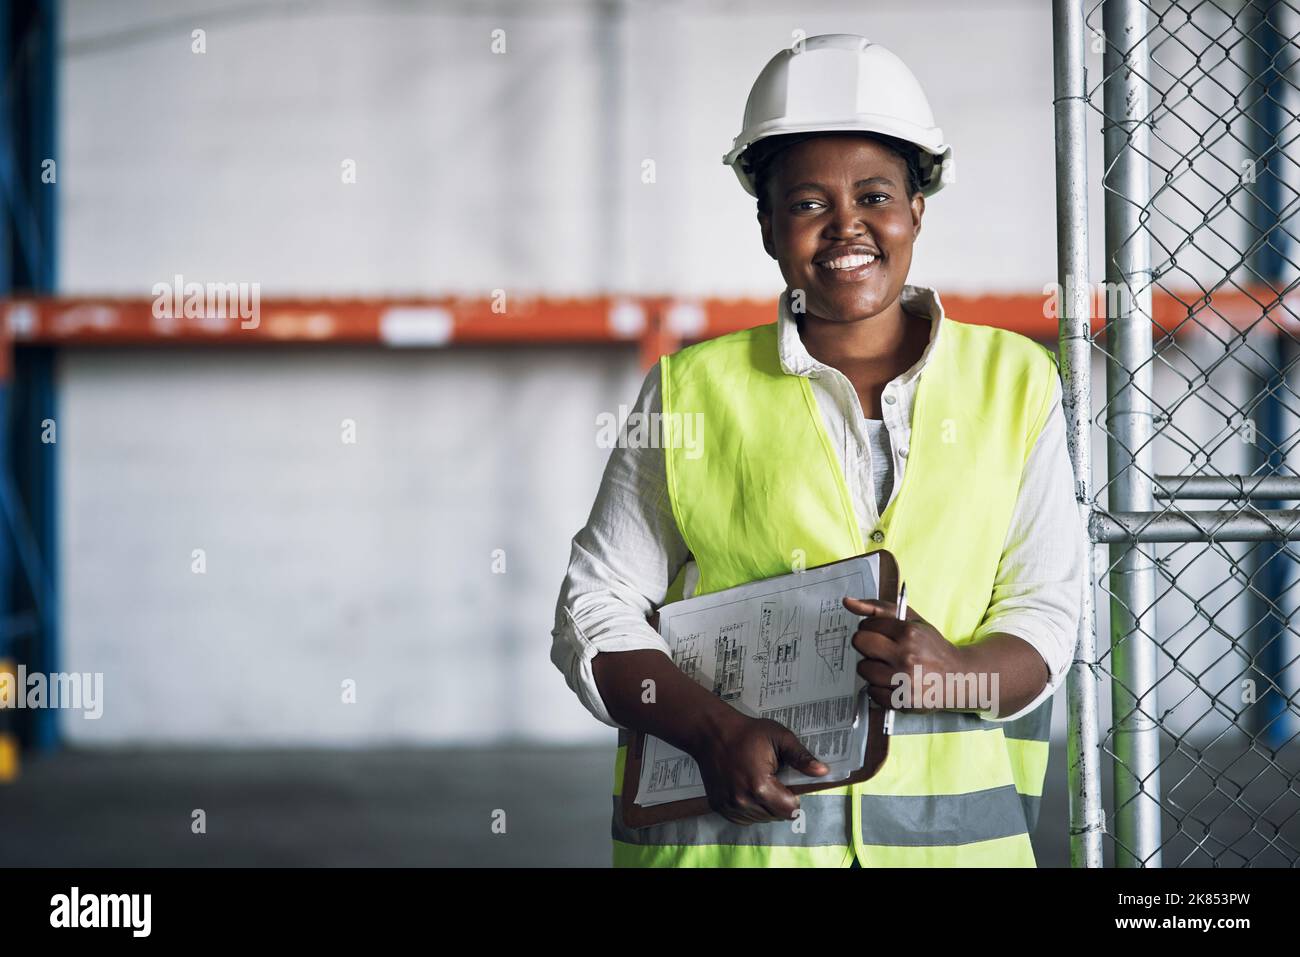 Get your helmet on, weve got hard work to do. Portrait of a confident young woman working a construction site. Stock Photo